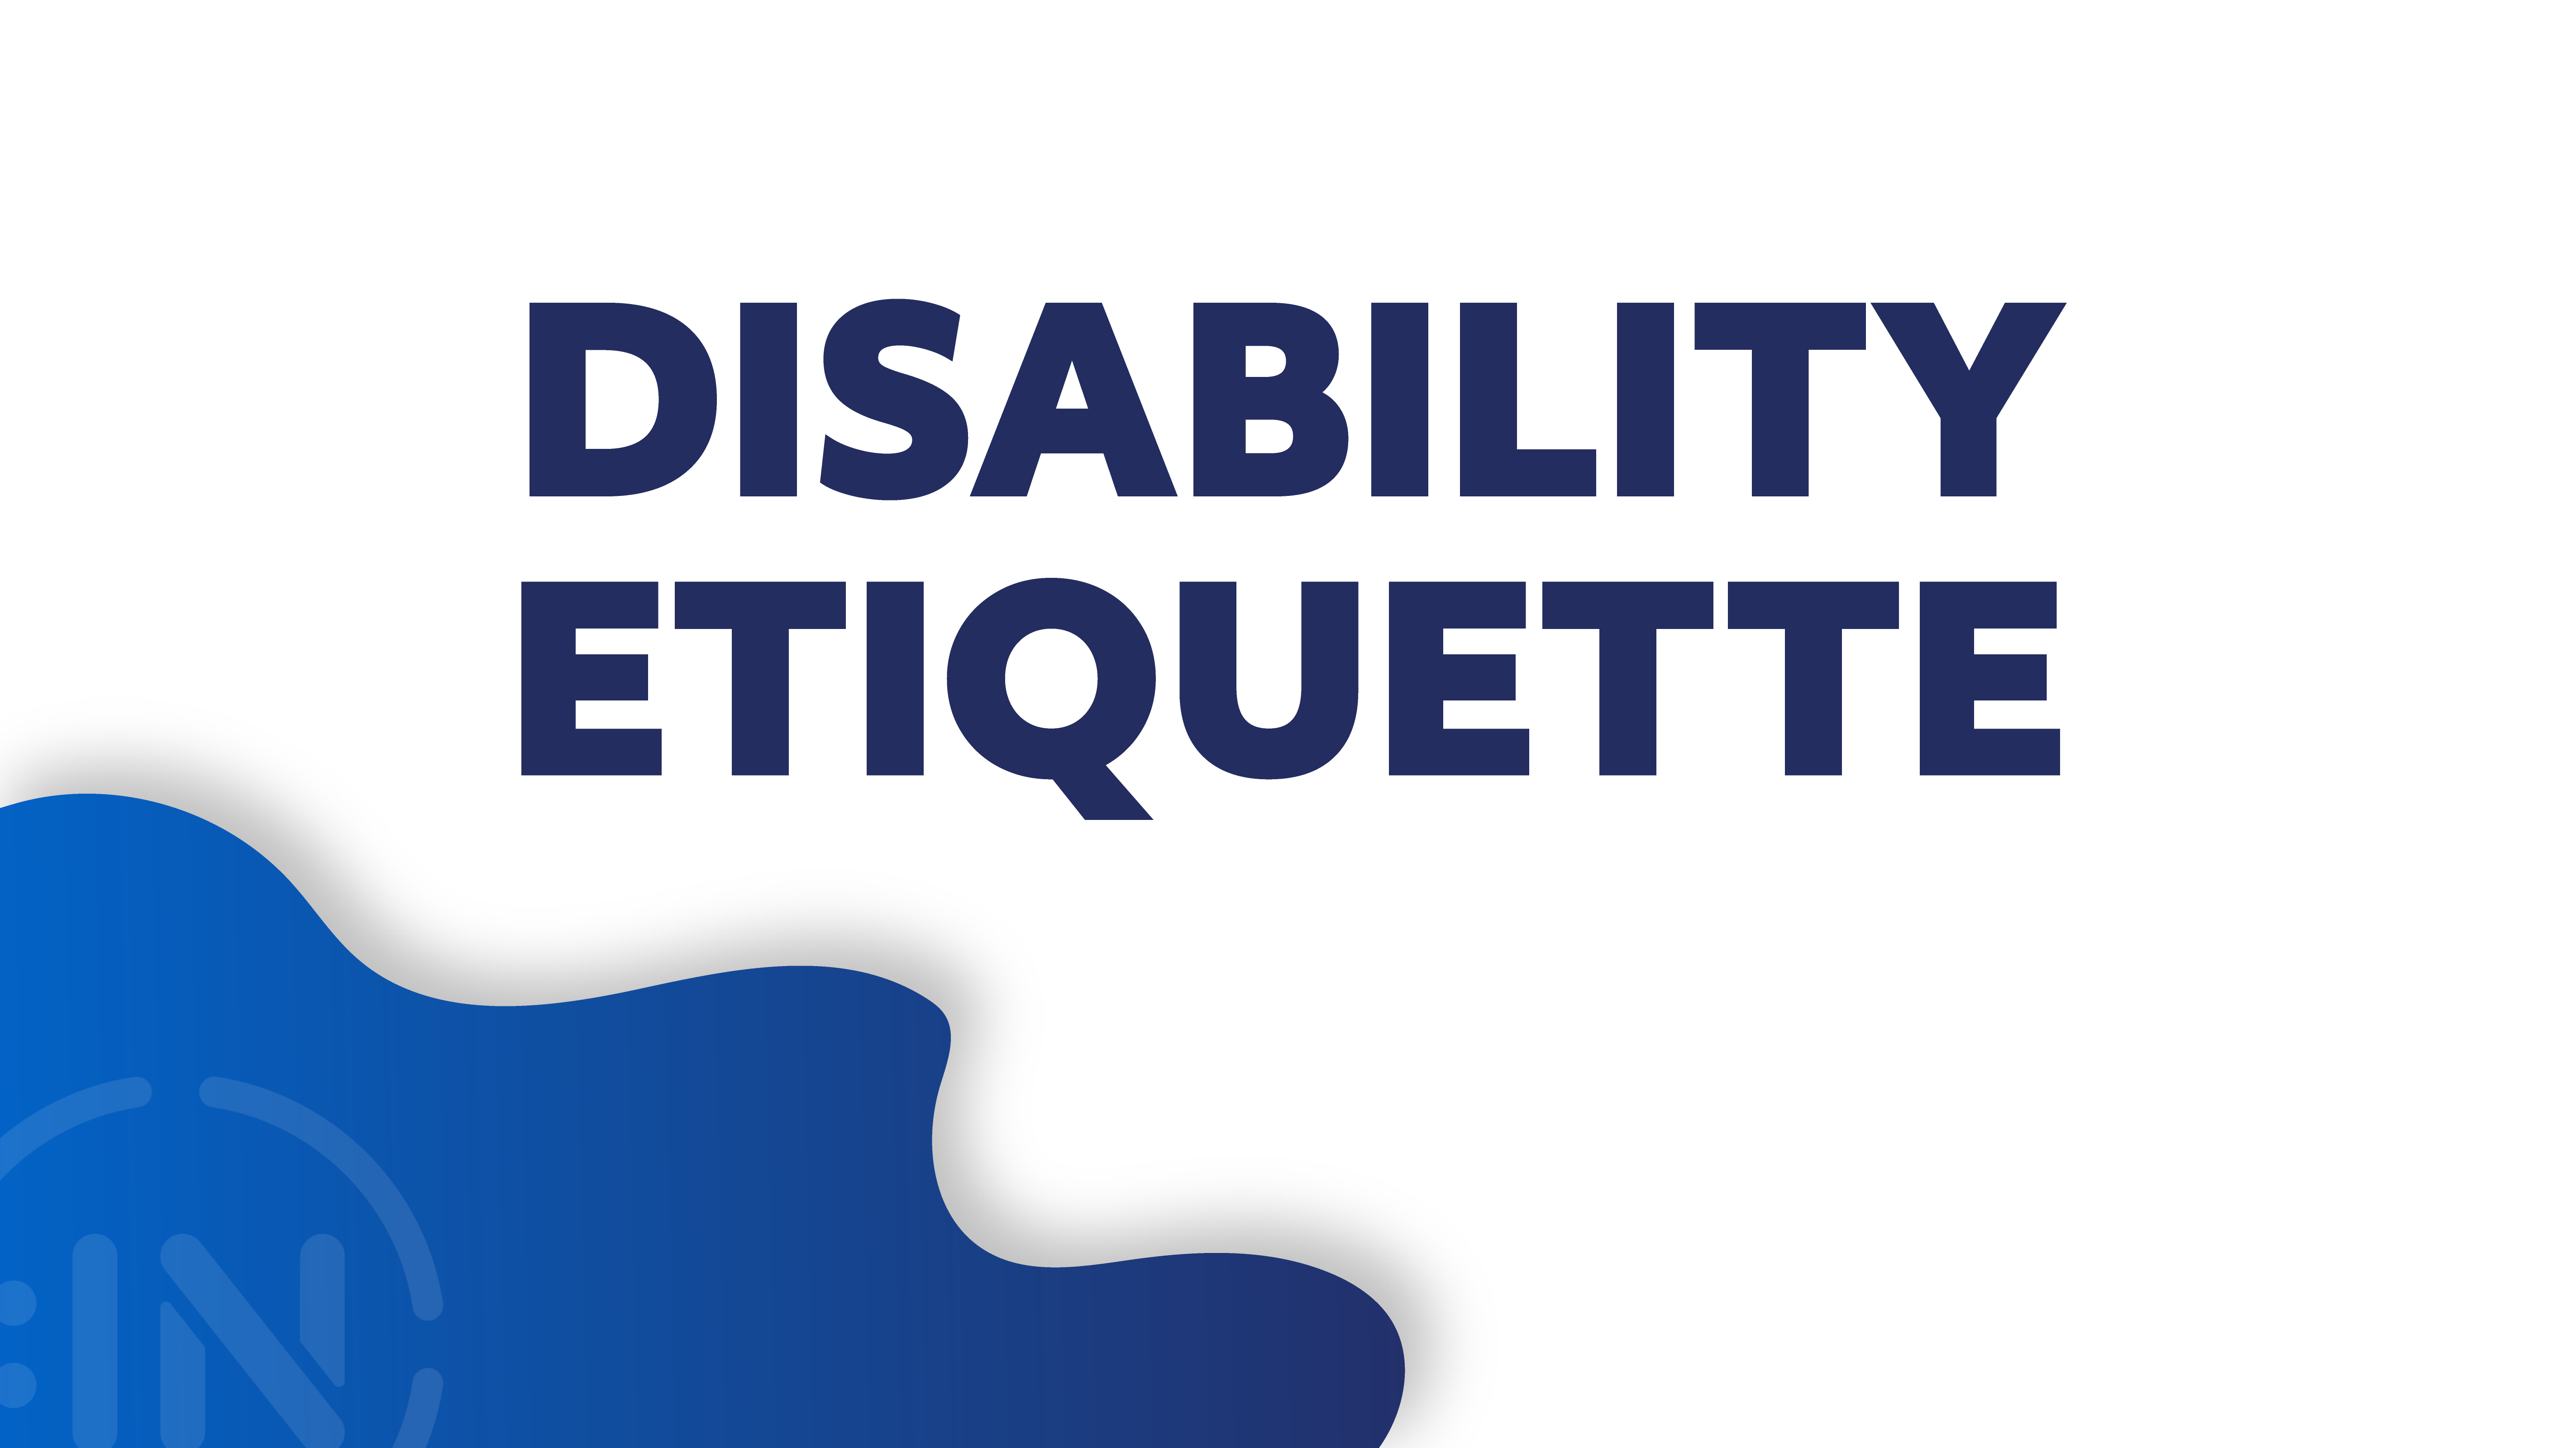 Session related to Disability Etiquette